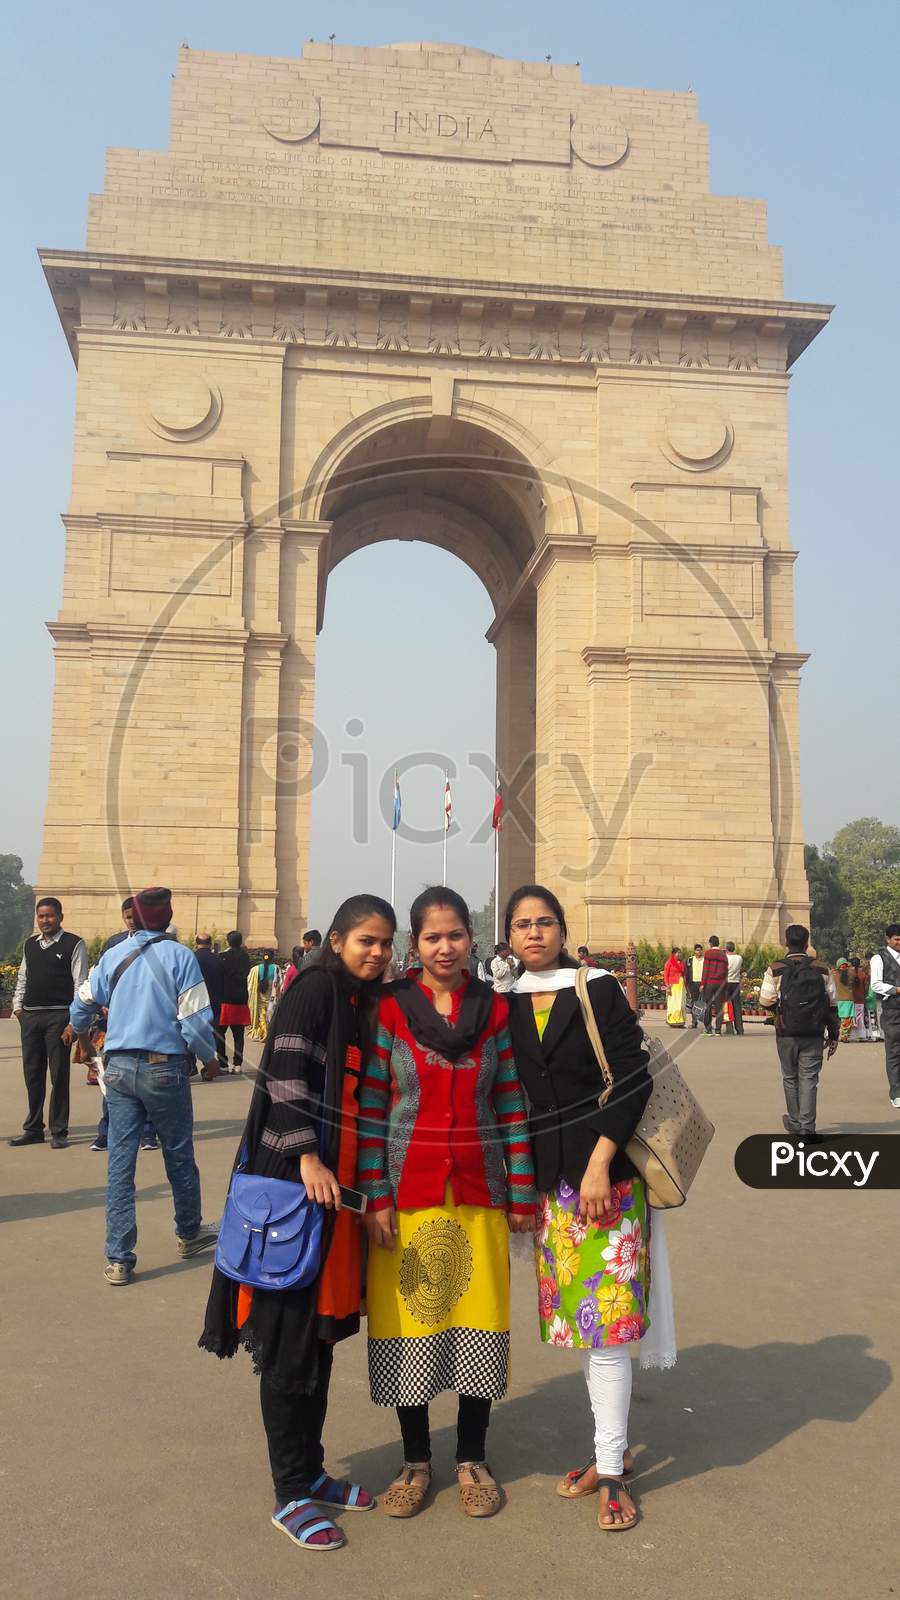 Indian girls together at background India gate